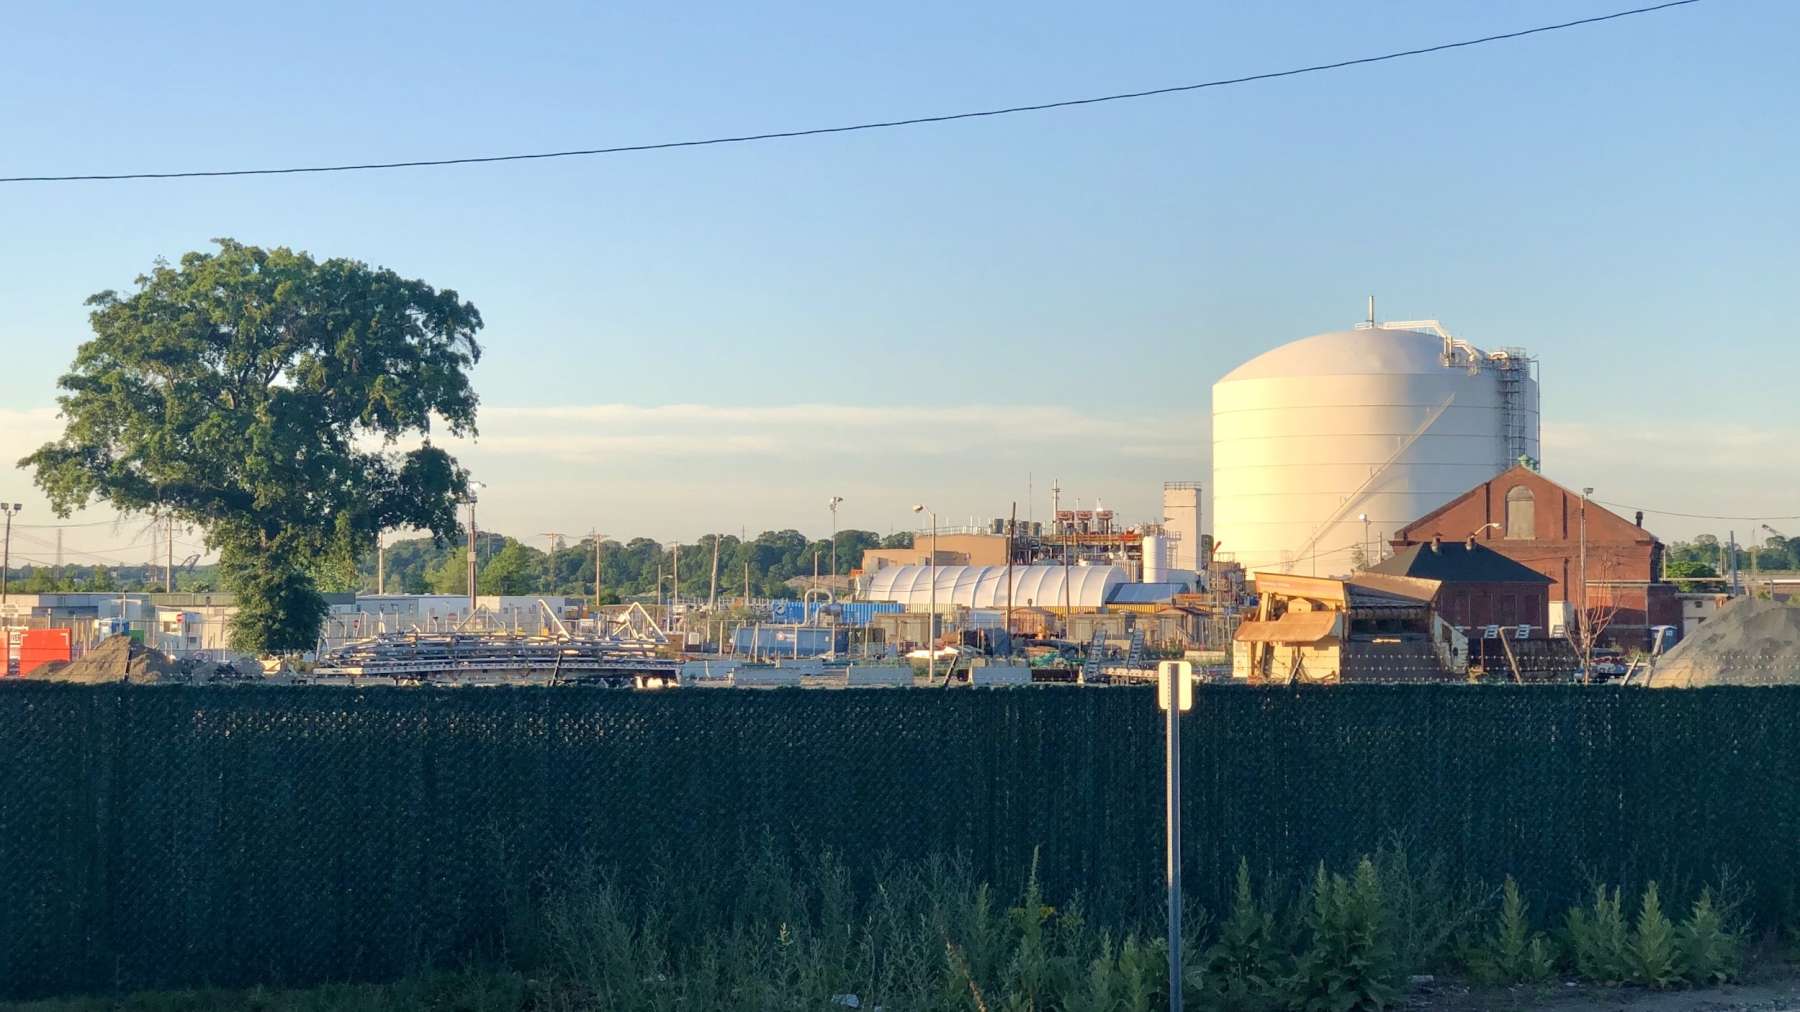 PVD City Solicitor and AG Neronha join CLF as intervenors in Sea 3 LPG expansion proceedings